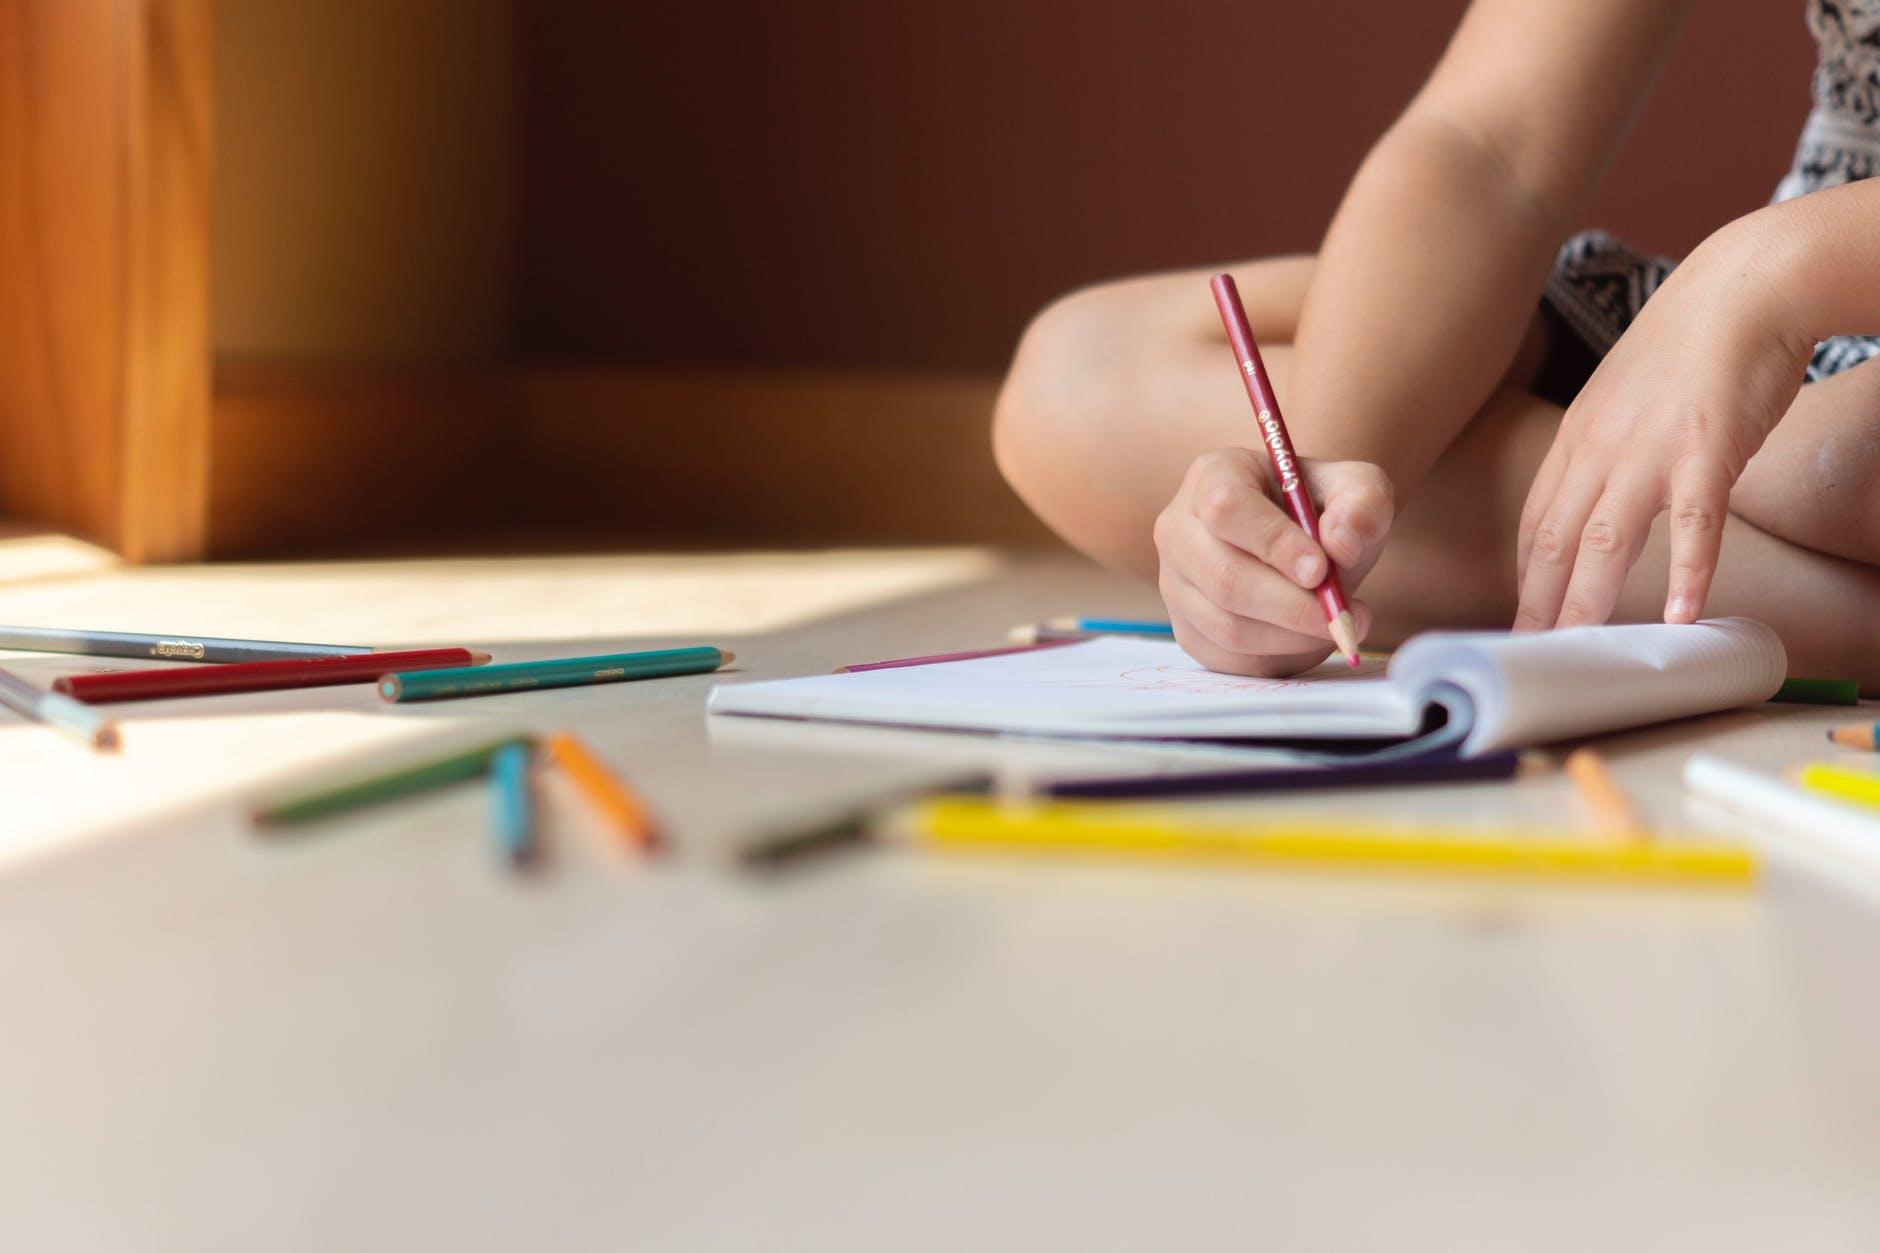 The Right Way To Encourage Creativity In Your Kids